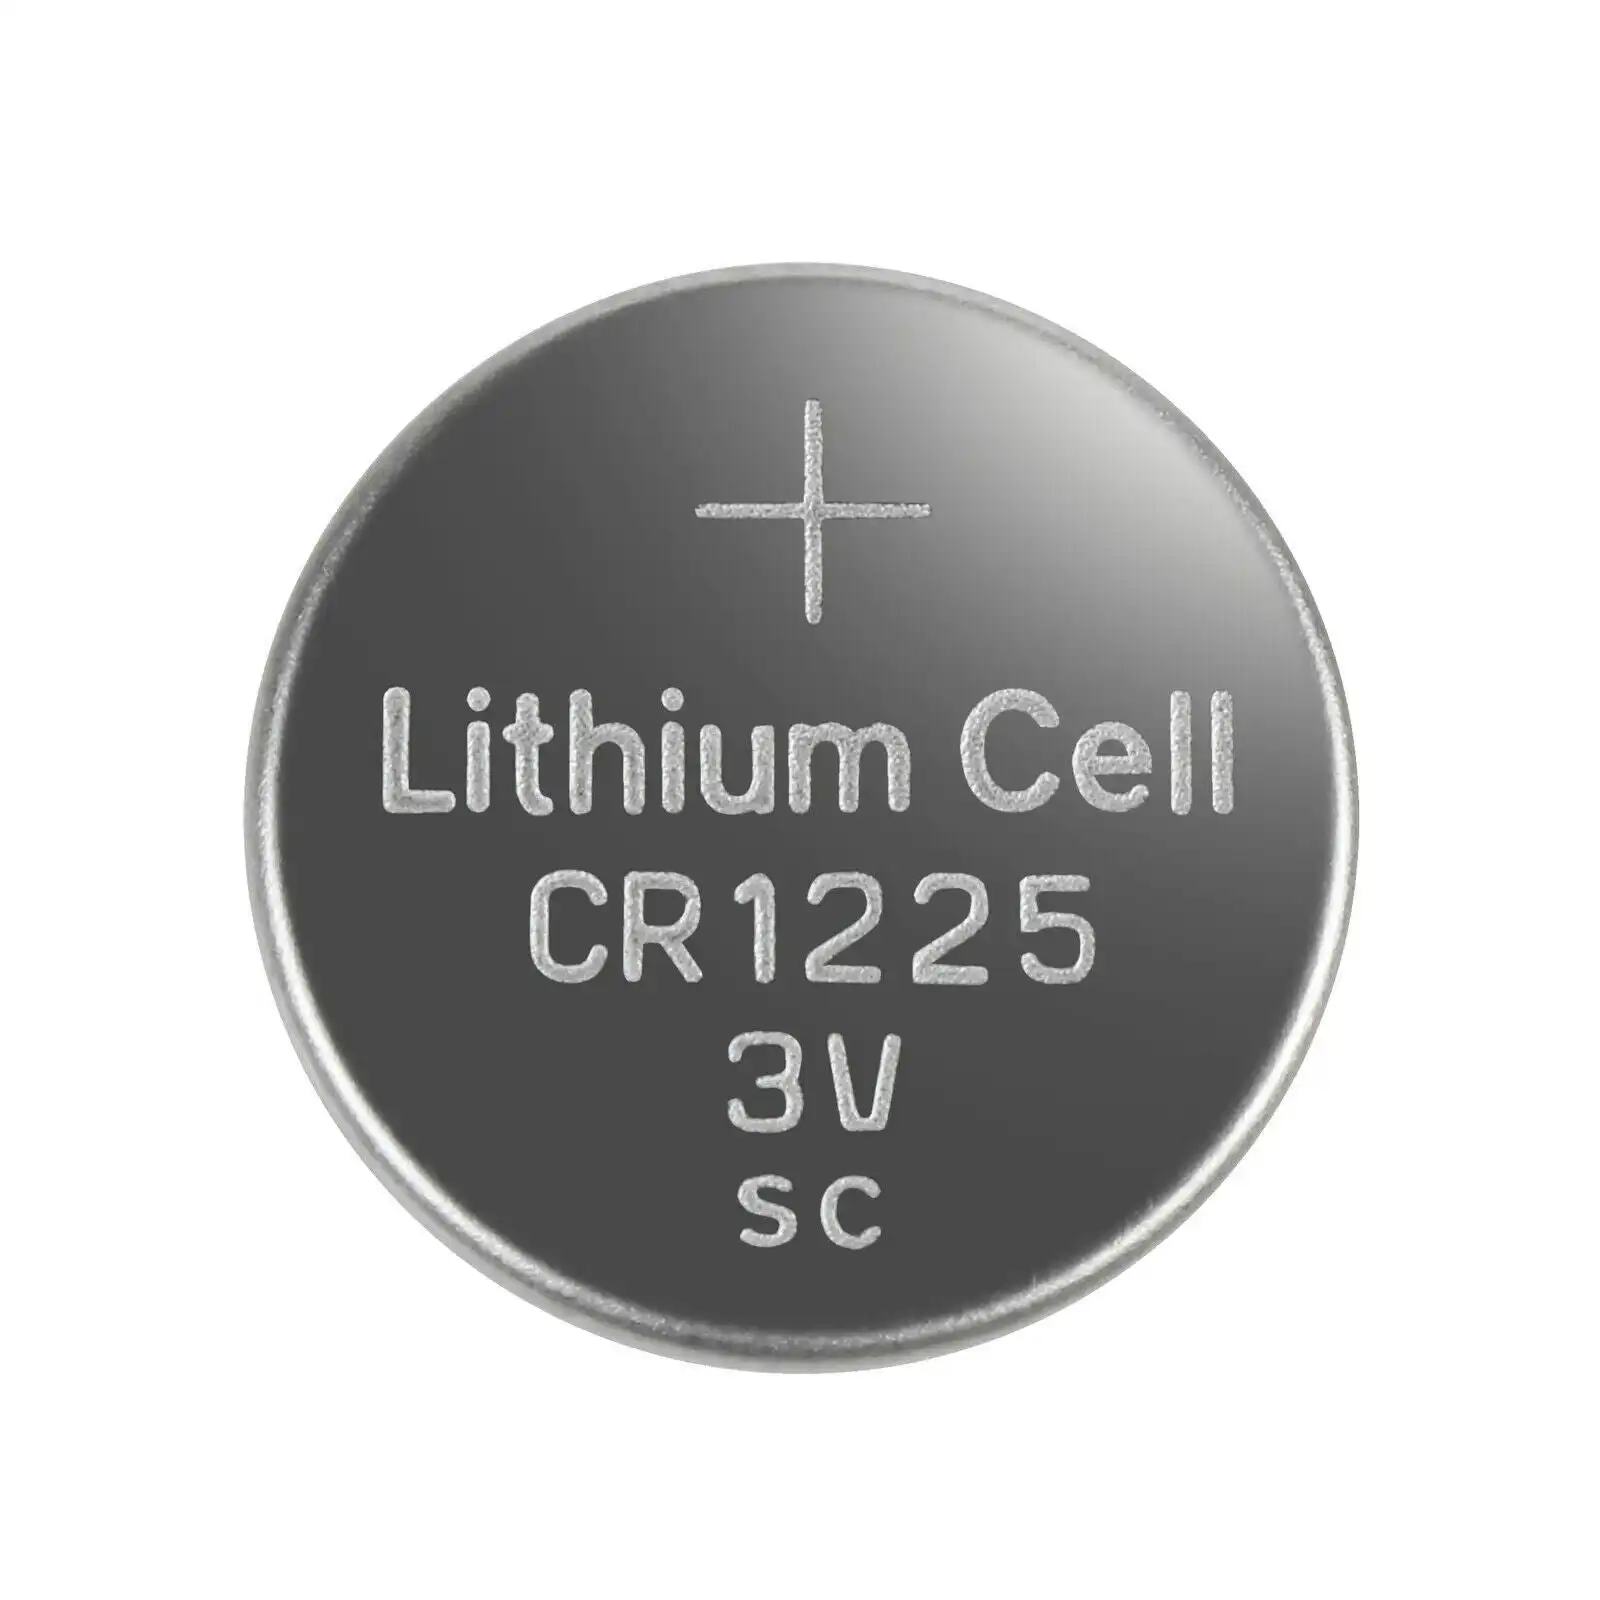 [10 Pack] CR1225 Button Cell Batteries for toys watches remotes calculators